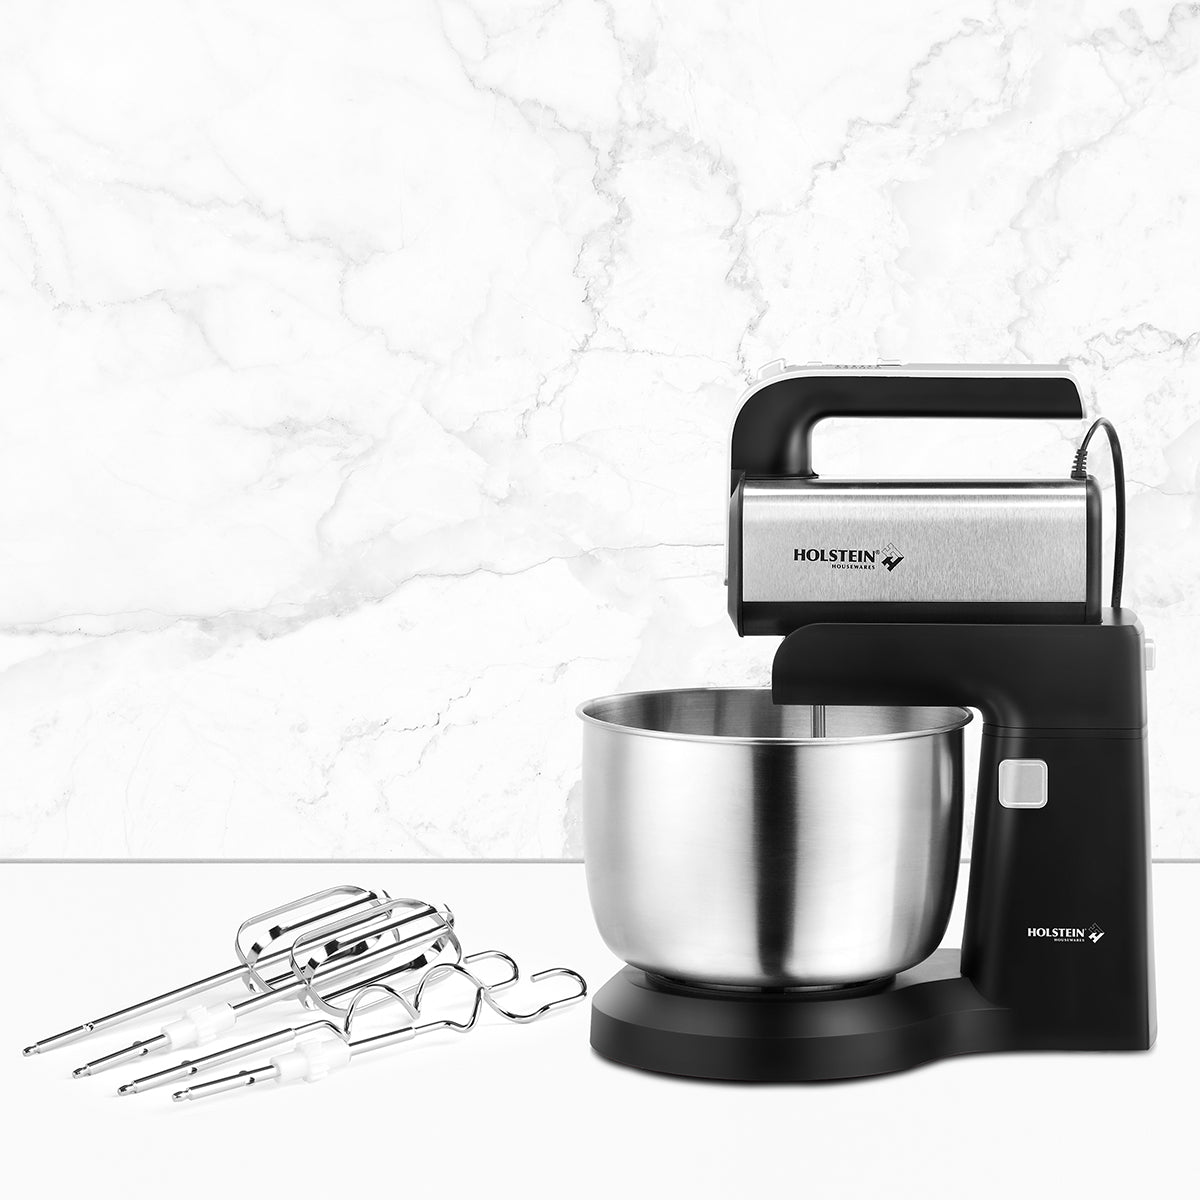 5-SPEED HAND AND STAND MIXER WITH LED